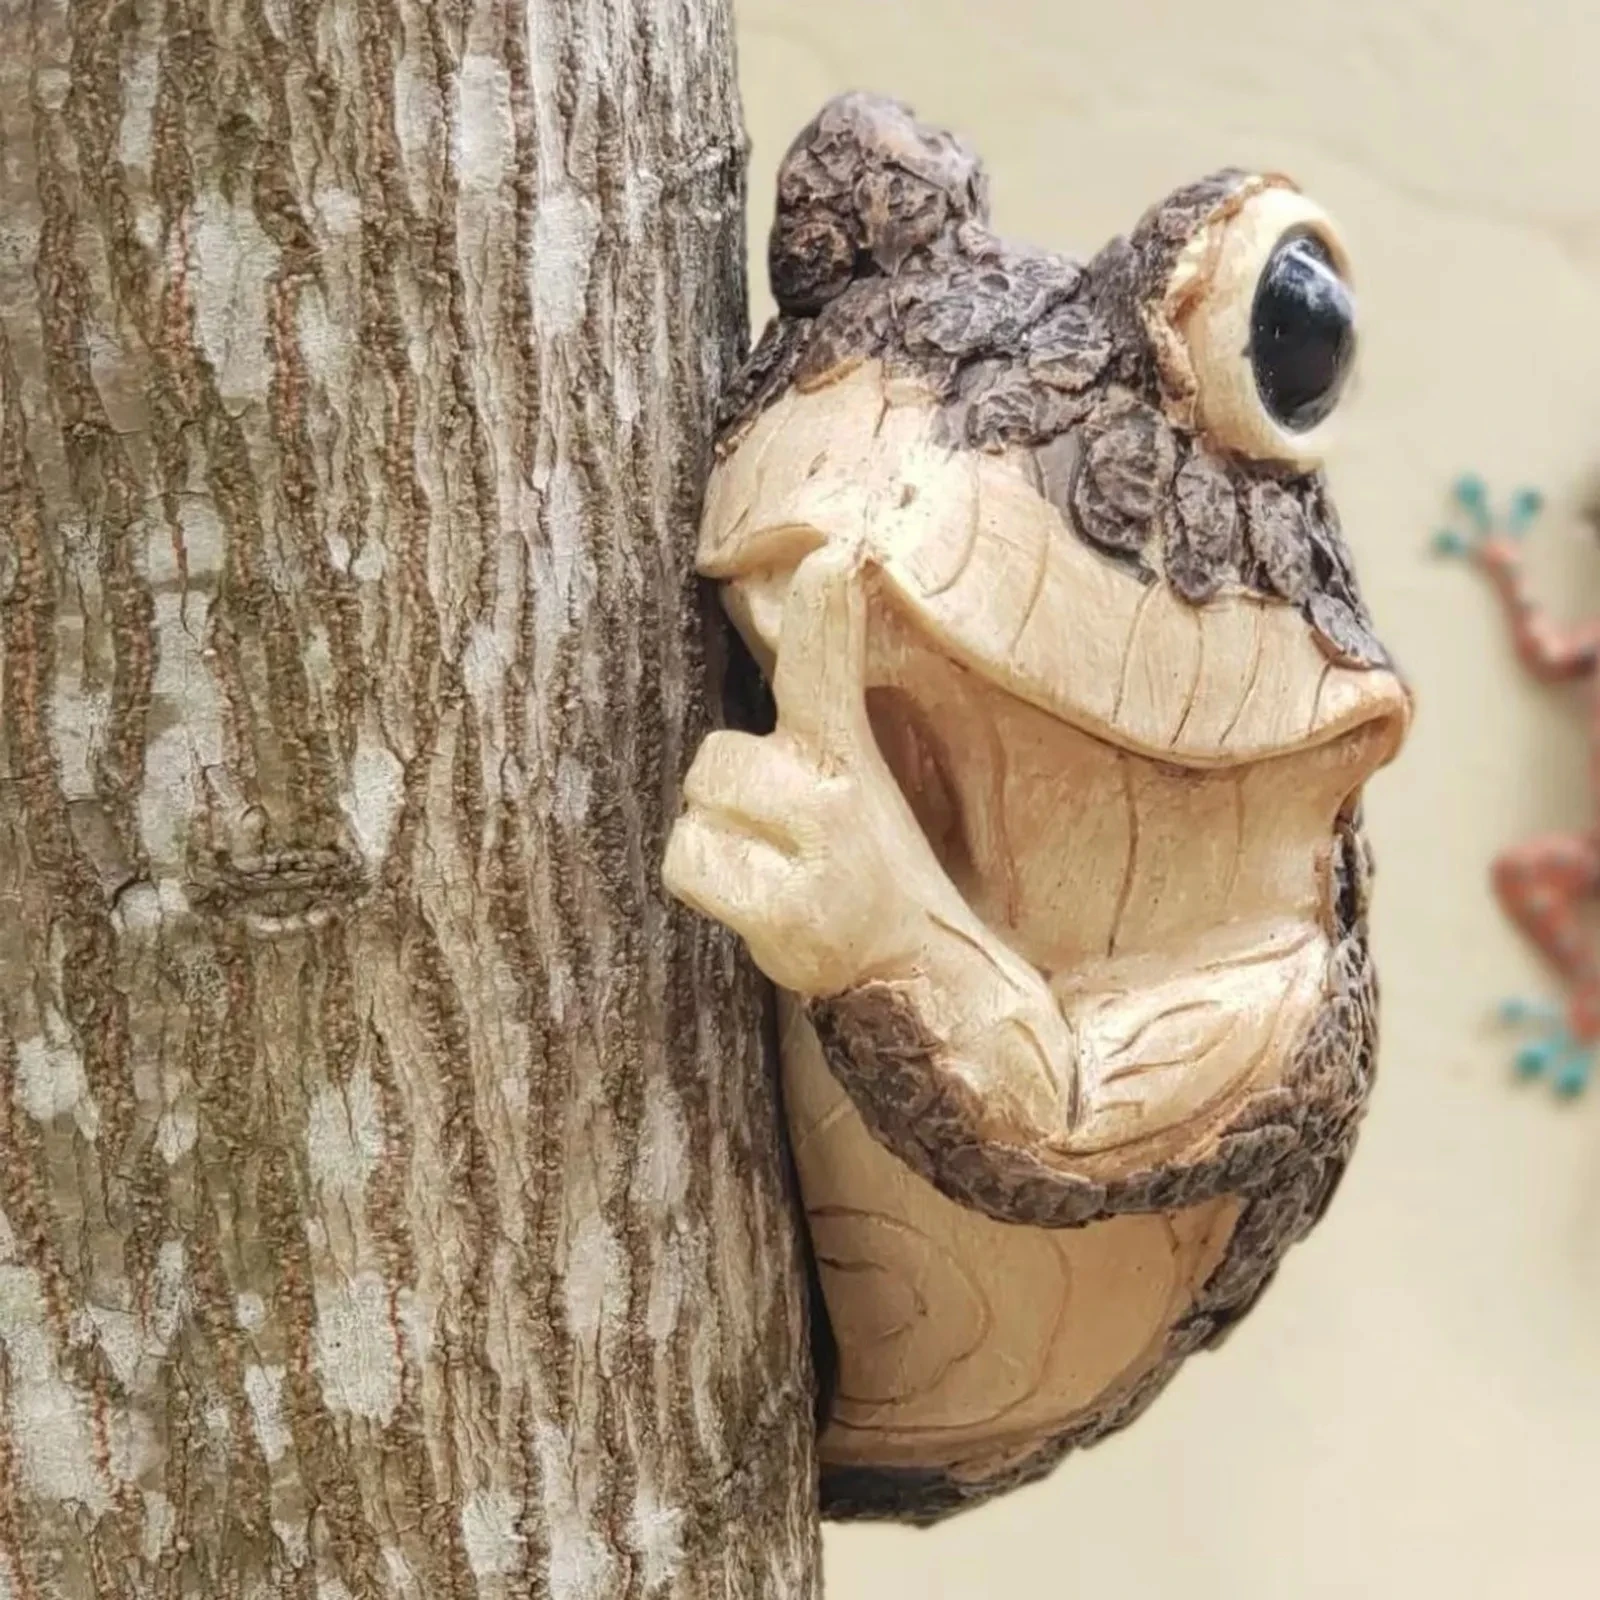 

Garden And Lawn Wizard Resin Ornament Adorable Frog Peeping Tree Outdoor Statues Animal Sloth Hug Yard Sculpture Decorations